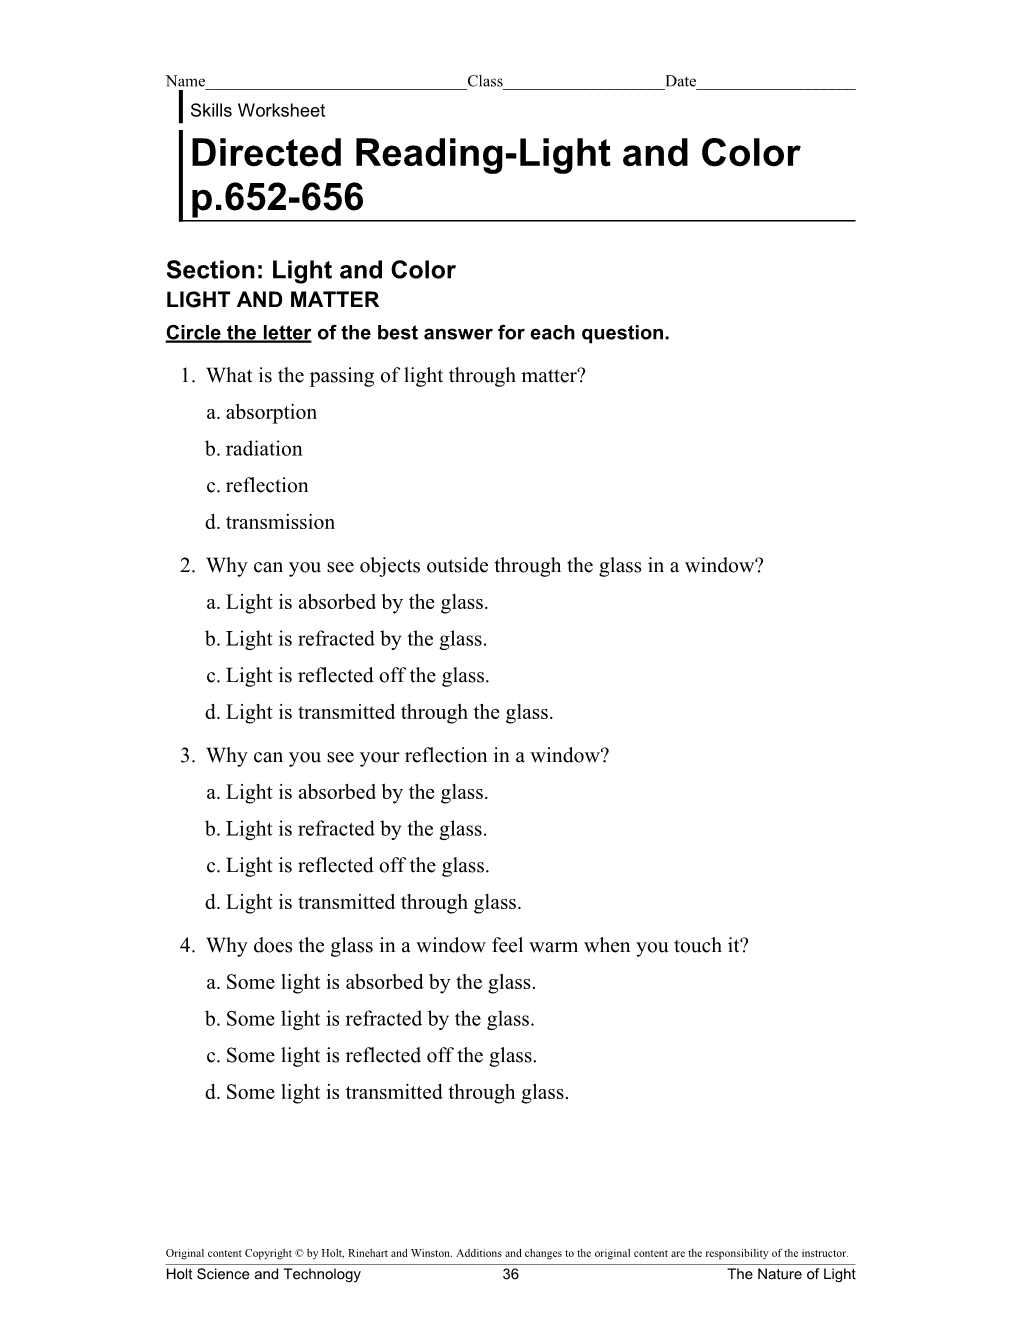 Directed Reading-Light and Color P.652-656